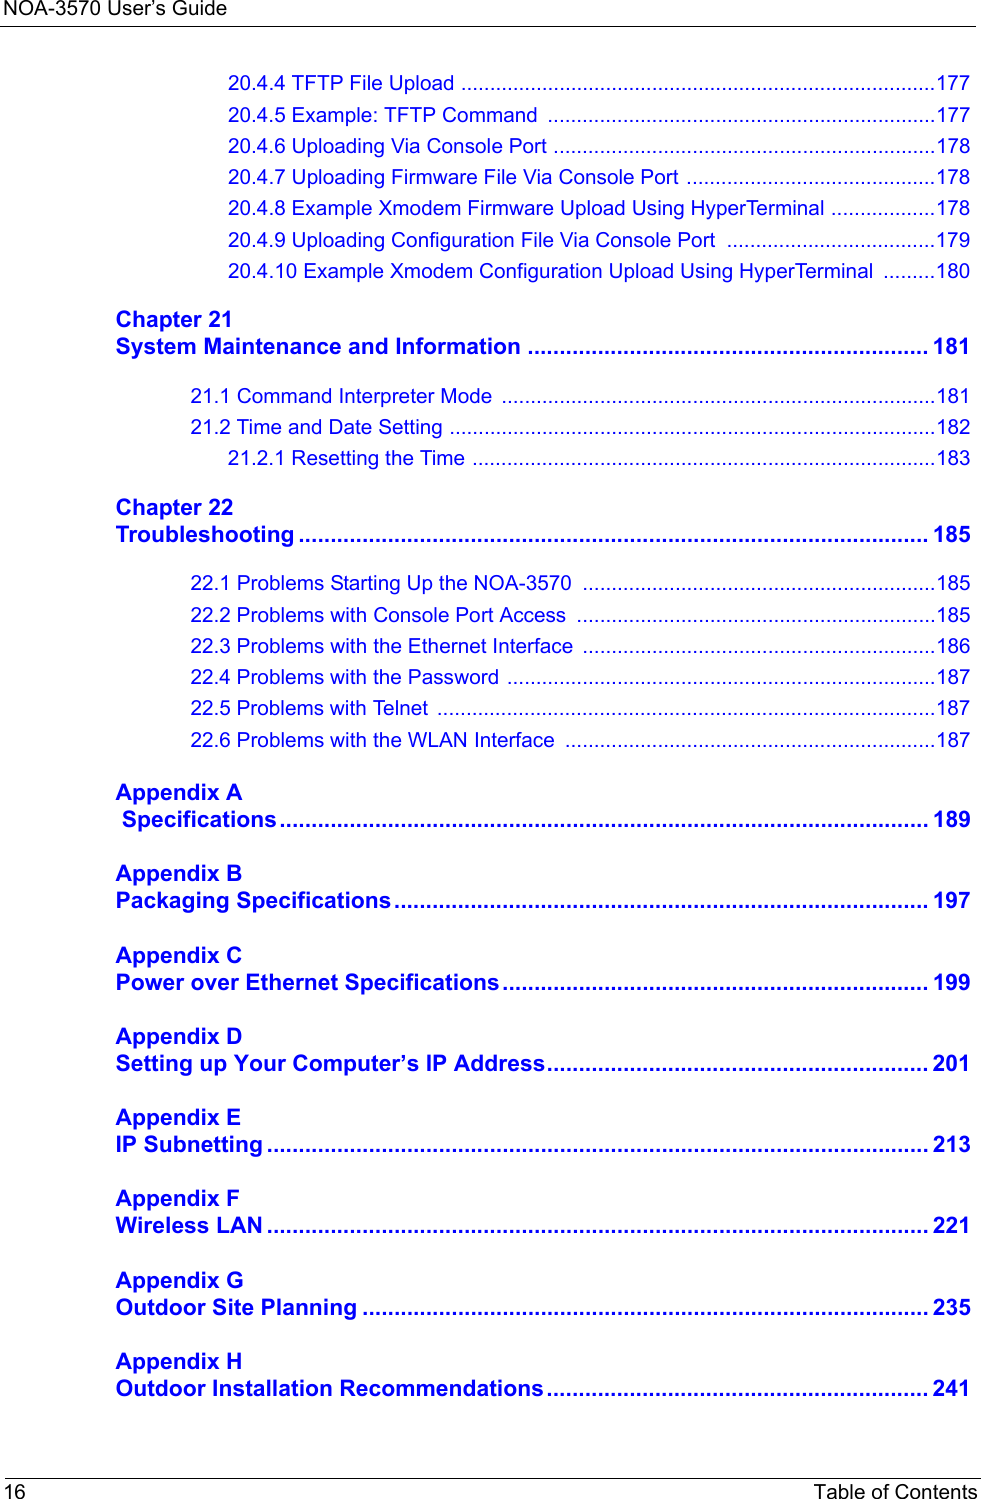 NOA-3570 User’s Guide16 Table of Contents20.4.4 TFTP File Upload ..................................................................................17720.4.5 Example: TFTP Command ...................................................................17720.4.6 Uploading Via Console Port ..................................................................17820.4.7 Uploading Firmware File Via Console Port ...........................................17820.4.8 Example Xmodem Firmware Upload Using HyperTerminal ..................17820.4.9 Uploading Configuration File Via Console Port  ....................................17920.4.10 Example Xmodem Configuration Upload Using HyperTerminal  .........180Chapter 21System Maintenance and Information ............................................................... 18121.1 Command Interpreter Mode ...........................................................................18121.2 Time and Date Setting ....................................................................................18221.2.1 Resetting the Time ................................................................................183Chapter 22Troubleshooting ................................................................................................... 18522.1 Problems Starting Up the NOA-3570  .............................................................18522.2 Problems with Console Port Access  ..............................................................18522.3 Problems with the Ethernet Interface  .............................................................18622.4 Problems with the Password ..........................................................................18722.5 Problems with Telnet  ......................................................................................18722.6 Problems with the WLAN Interface  ................................................................187Appendix A Specifications...................................................................................................... 189Appendix BPackaging Specifications.................................................................................... 197Appendix CPower over Ethernet Specifications................................................................... 199Appendix DSetting up Your Computer’s IP Address............................................................ 201Appendix EIP Subnetting ........................................................................................................ 213Appendix FWireless LAN ........................................................................................................ 221Appendix GOutdoor Site Planning ......................................................................................... 235Appendix HOutdoor Installation Recommendations............................................................ 241